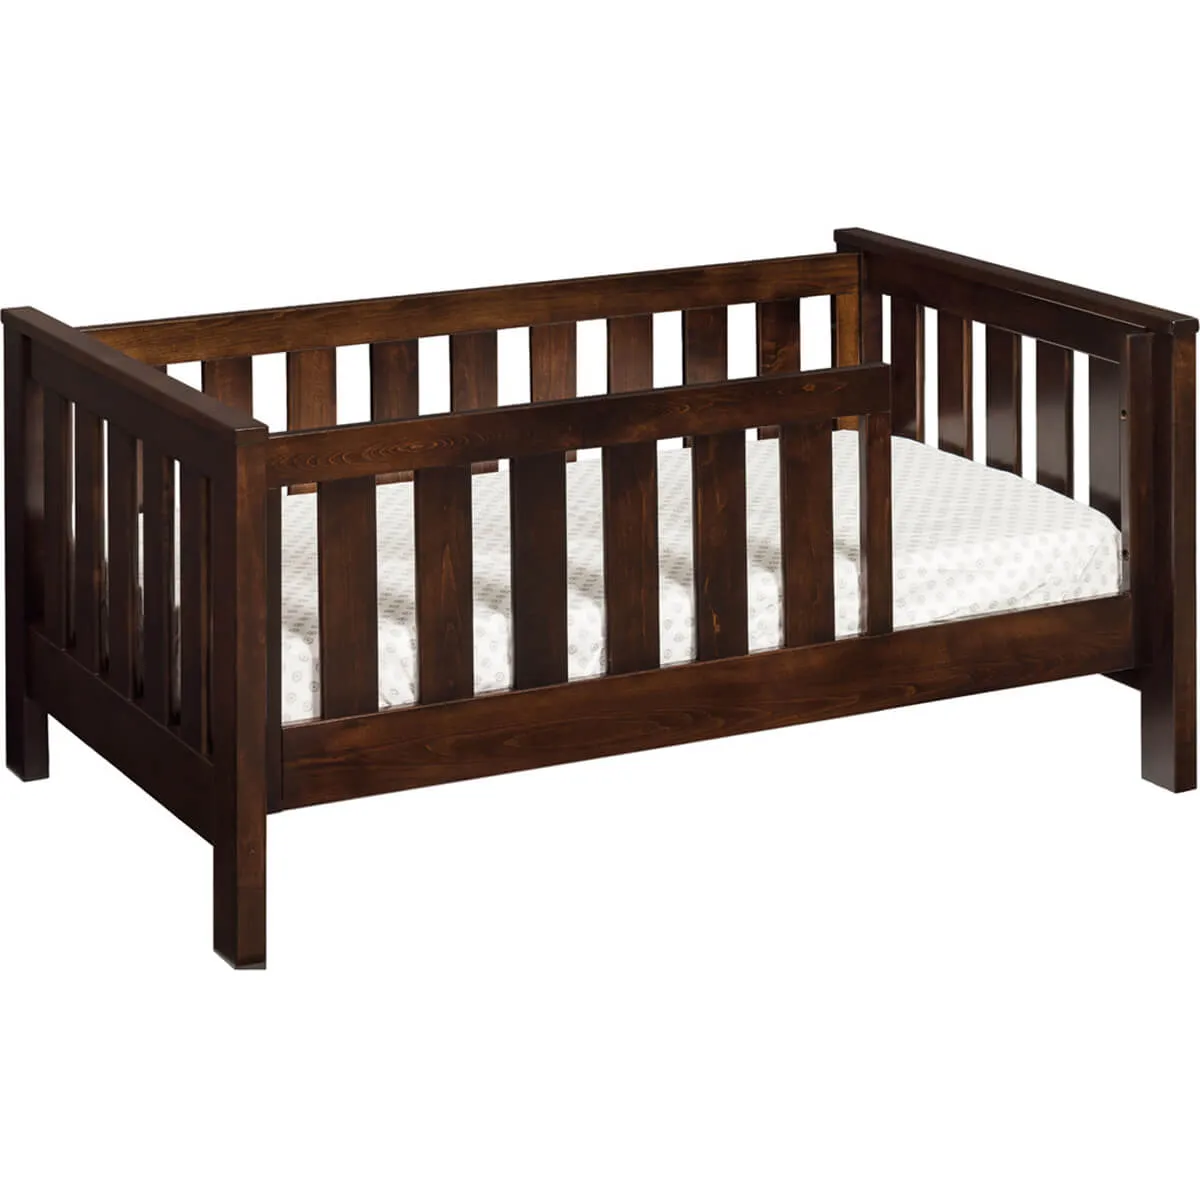 Toddler Bed with Slats